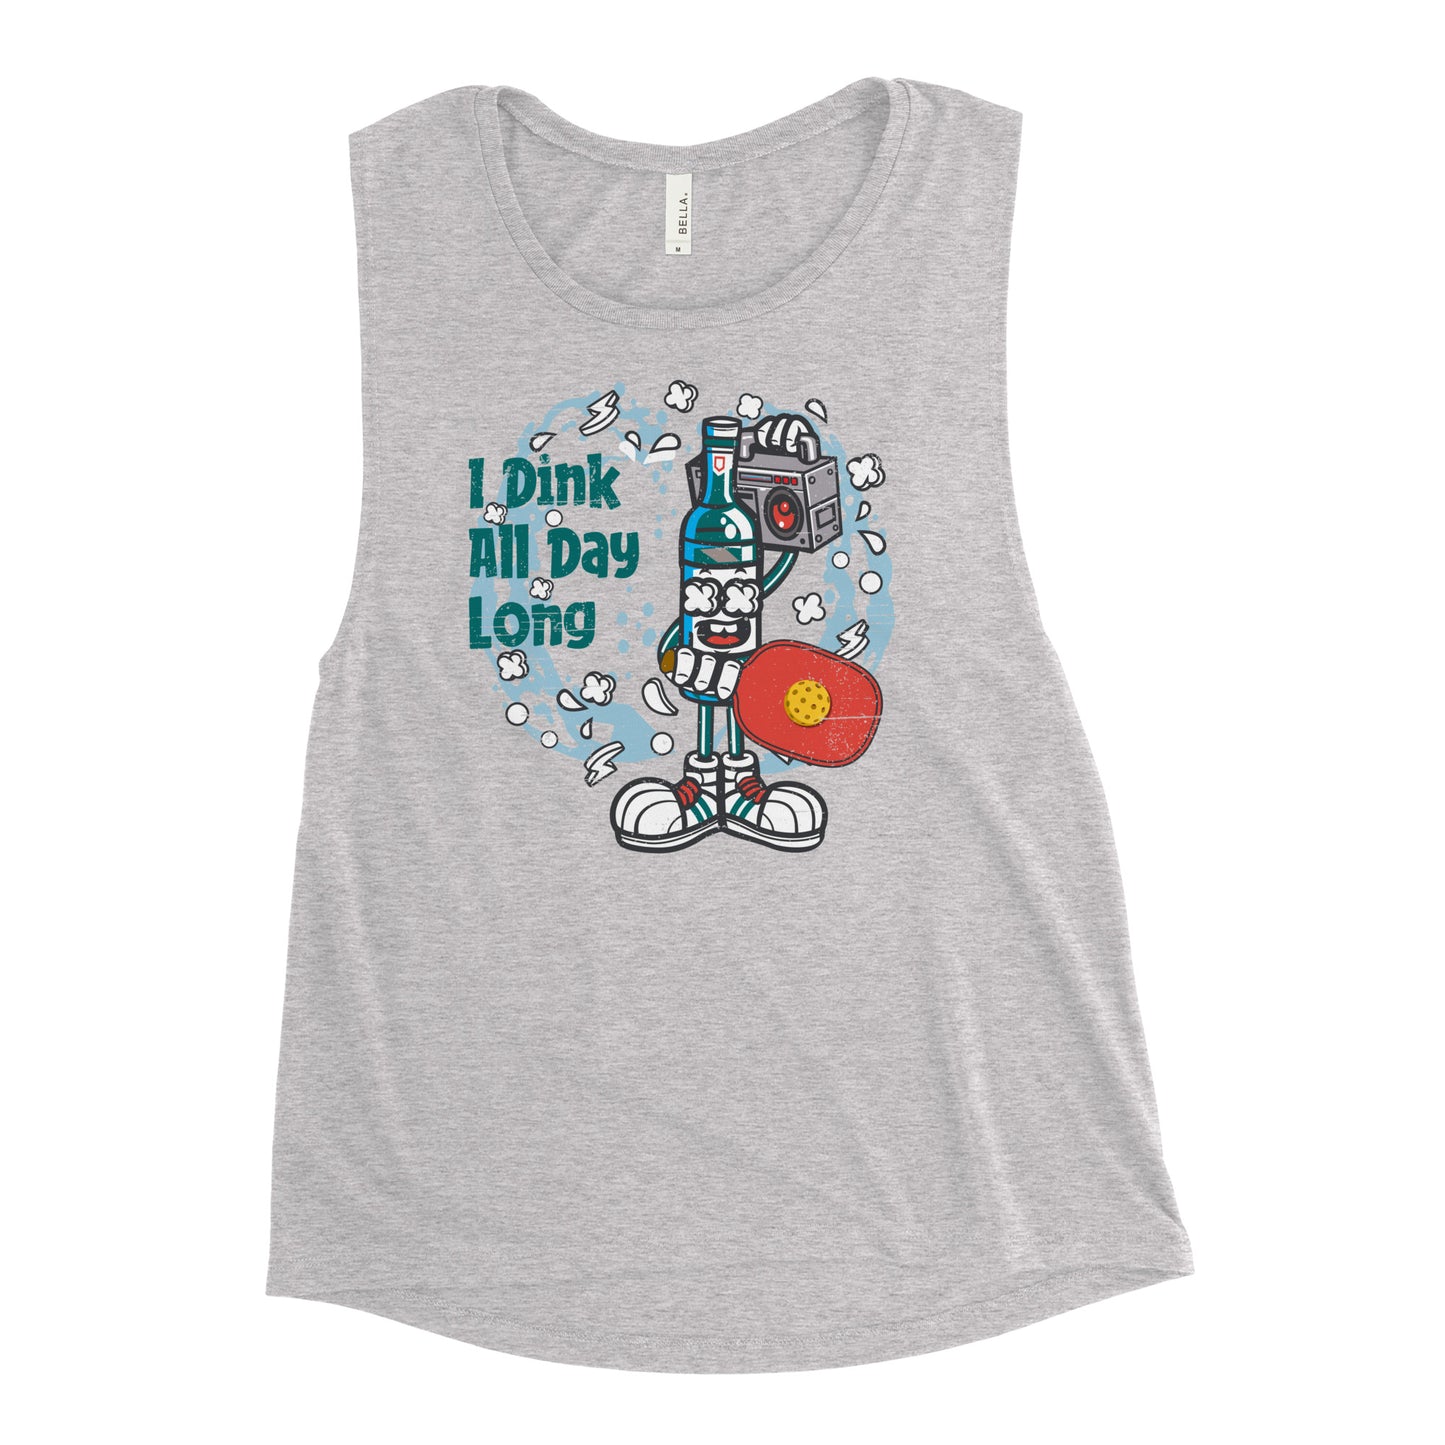 Ladies’ Best Pickleball Muscle Tank Top, "I Dink All Day"